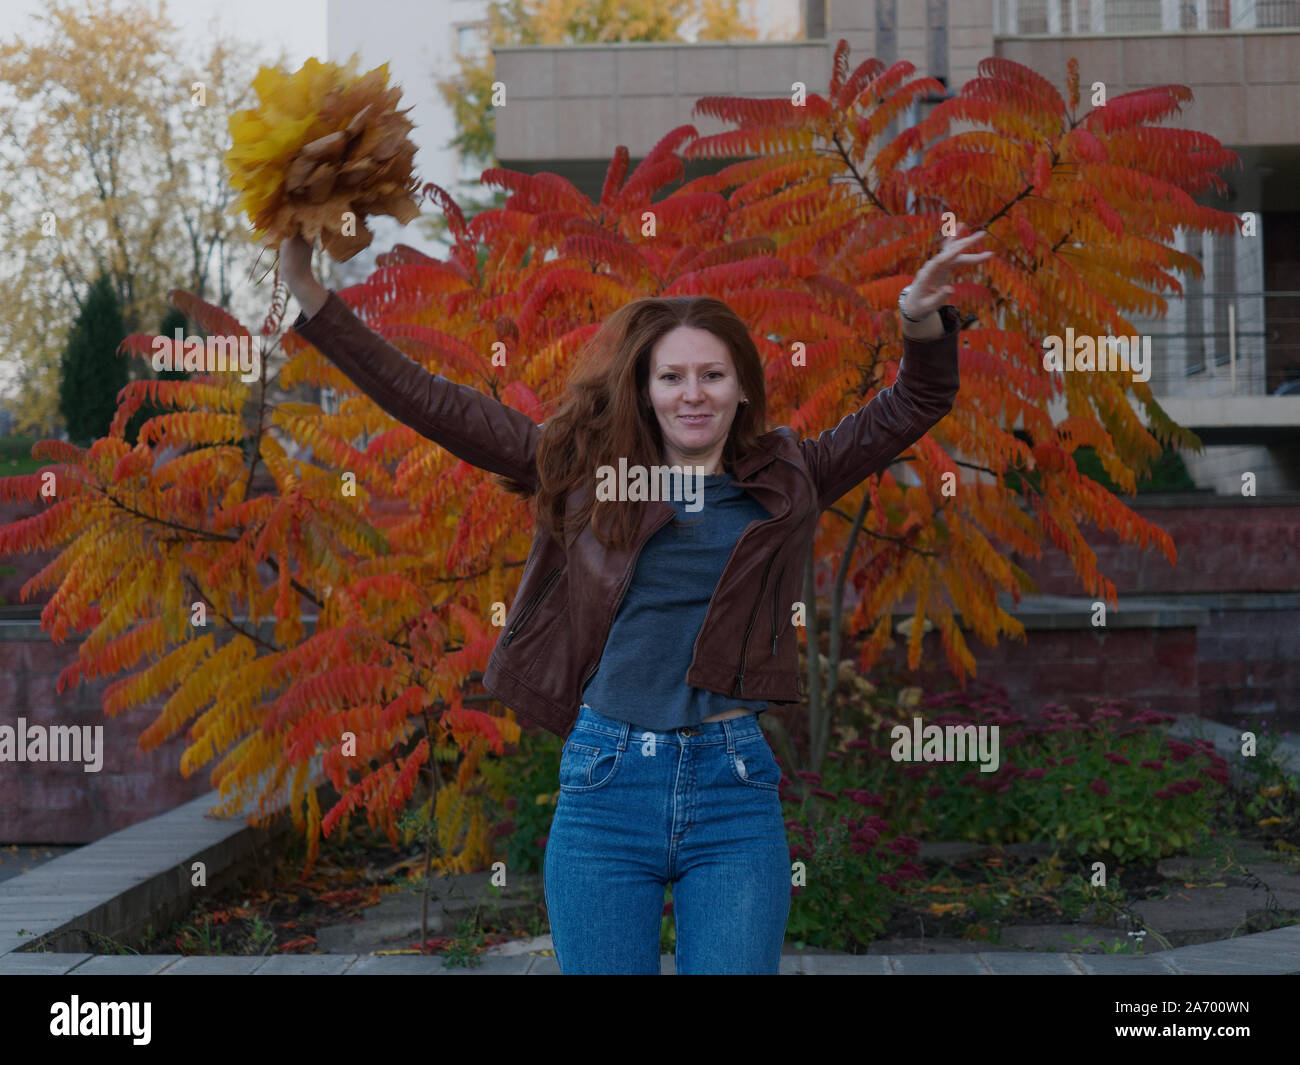 A red-haired girl with long curly hair jumps up and swirls holding yellowed autumn maple leaves in her hand. Behind the young girl, a bright orange ac Stock Photo